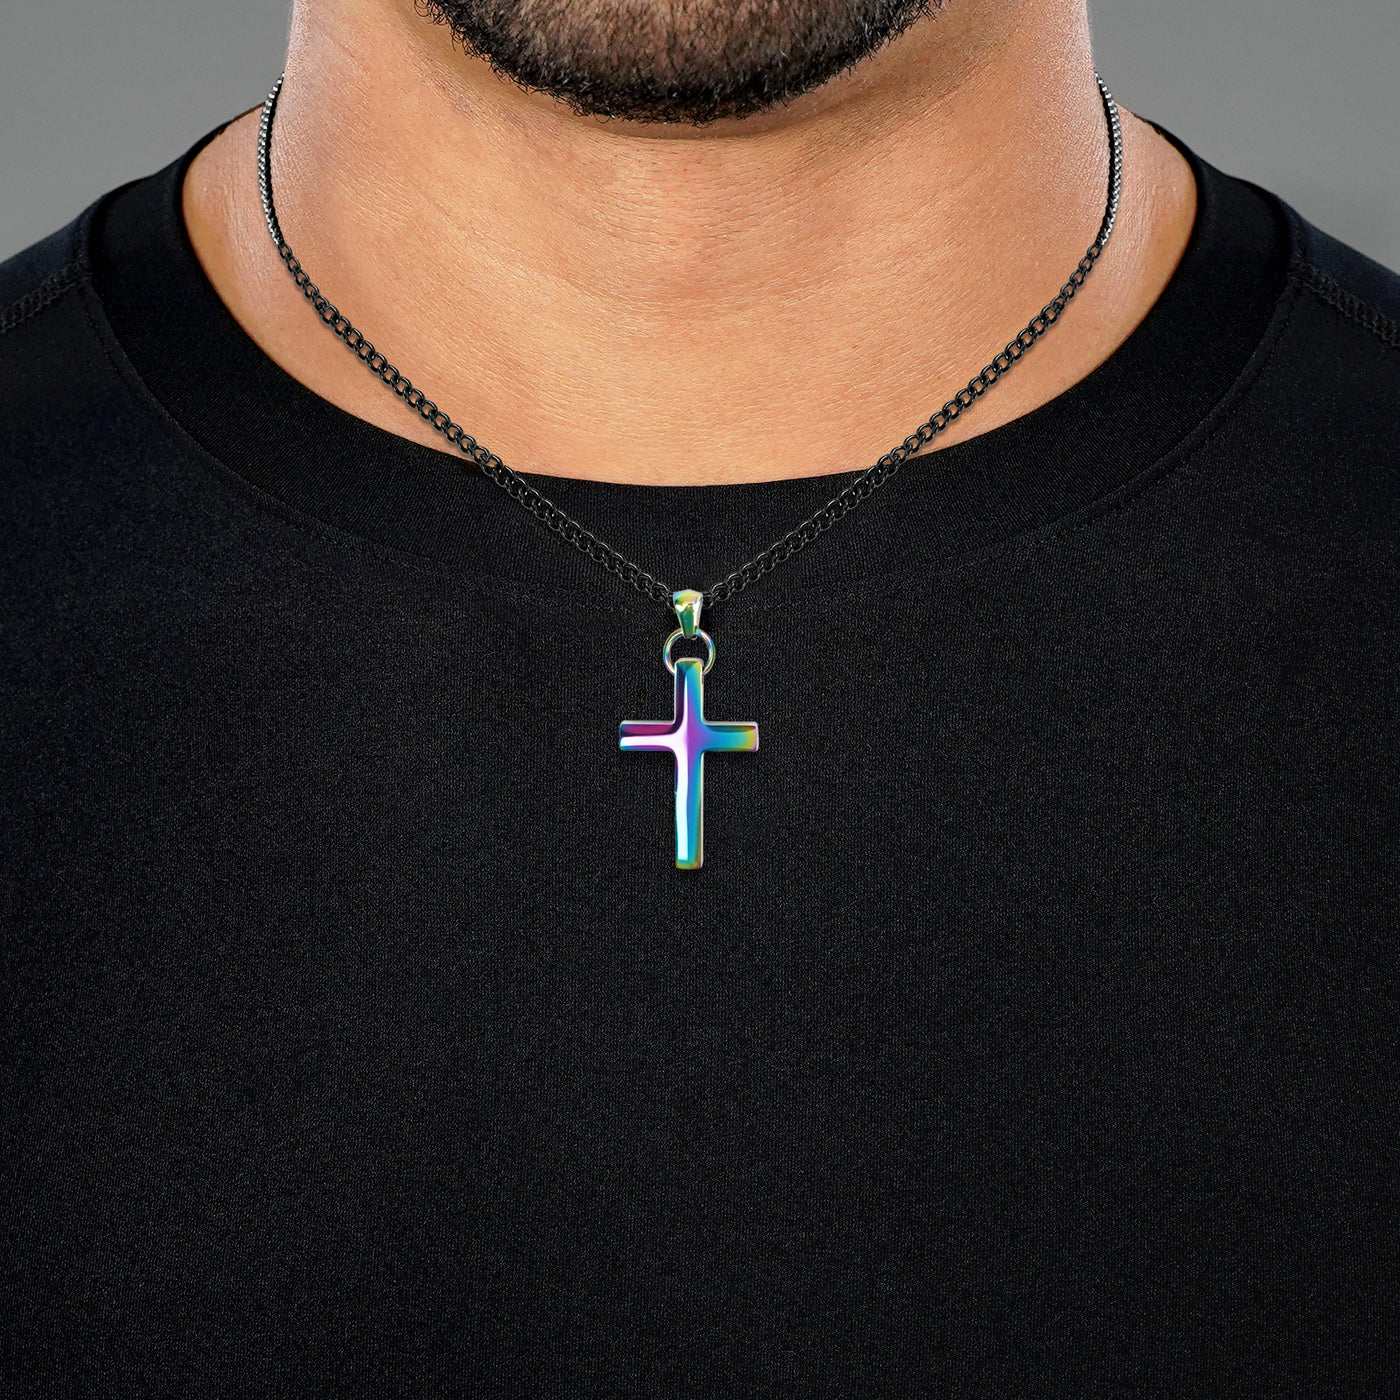 Faith Cross Pendant with Chain Necklace - Borealis Stainless Steel